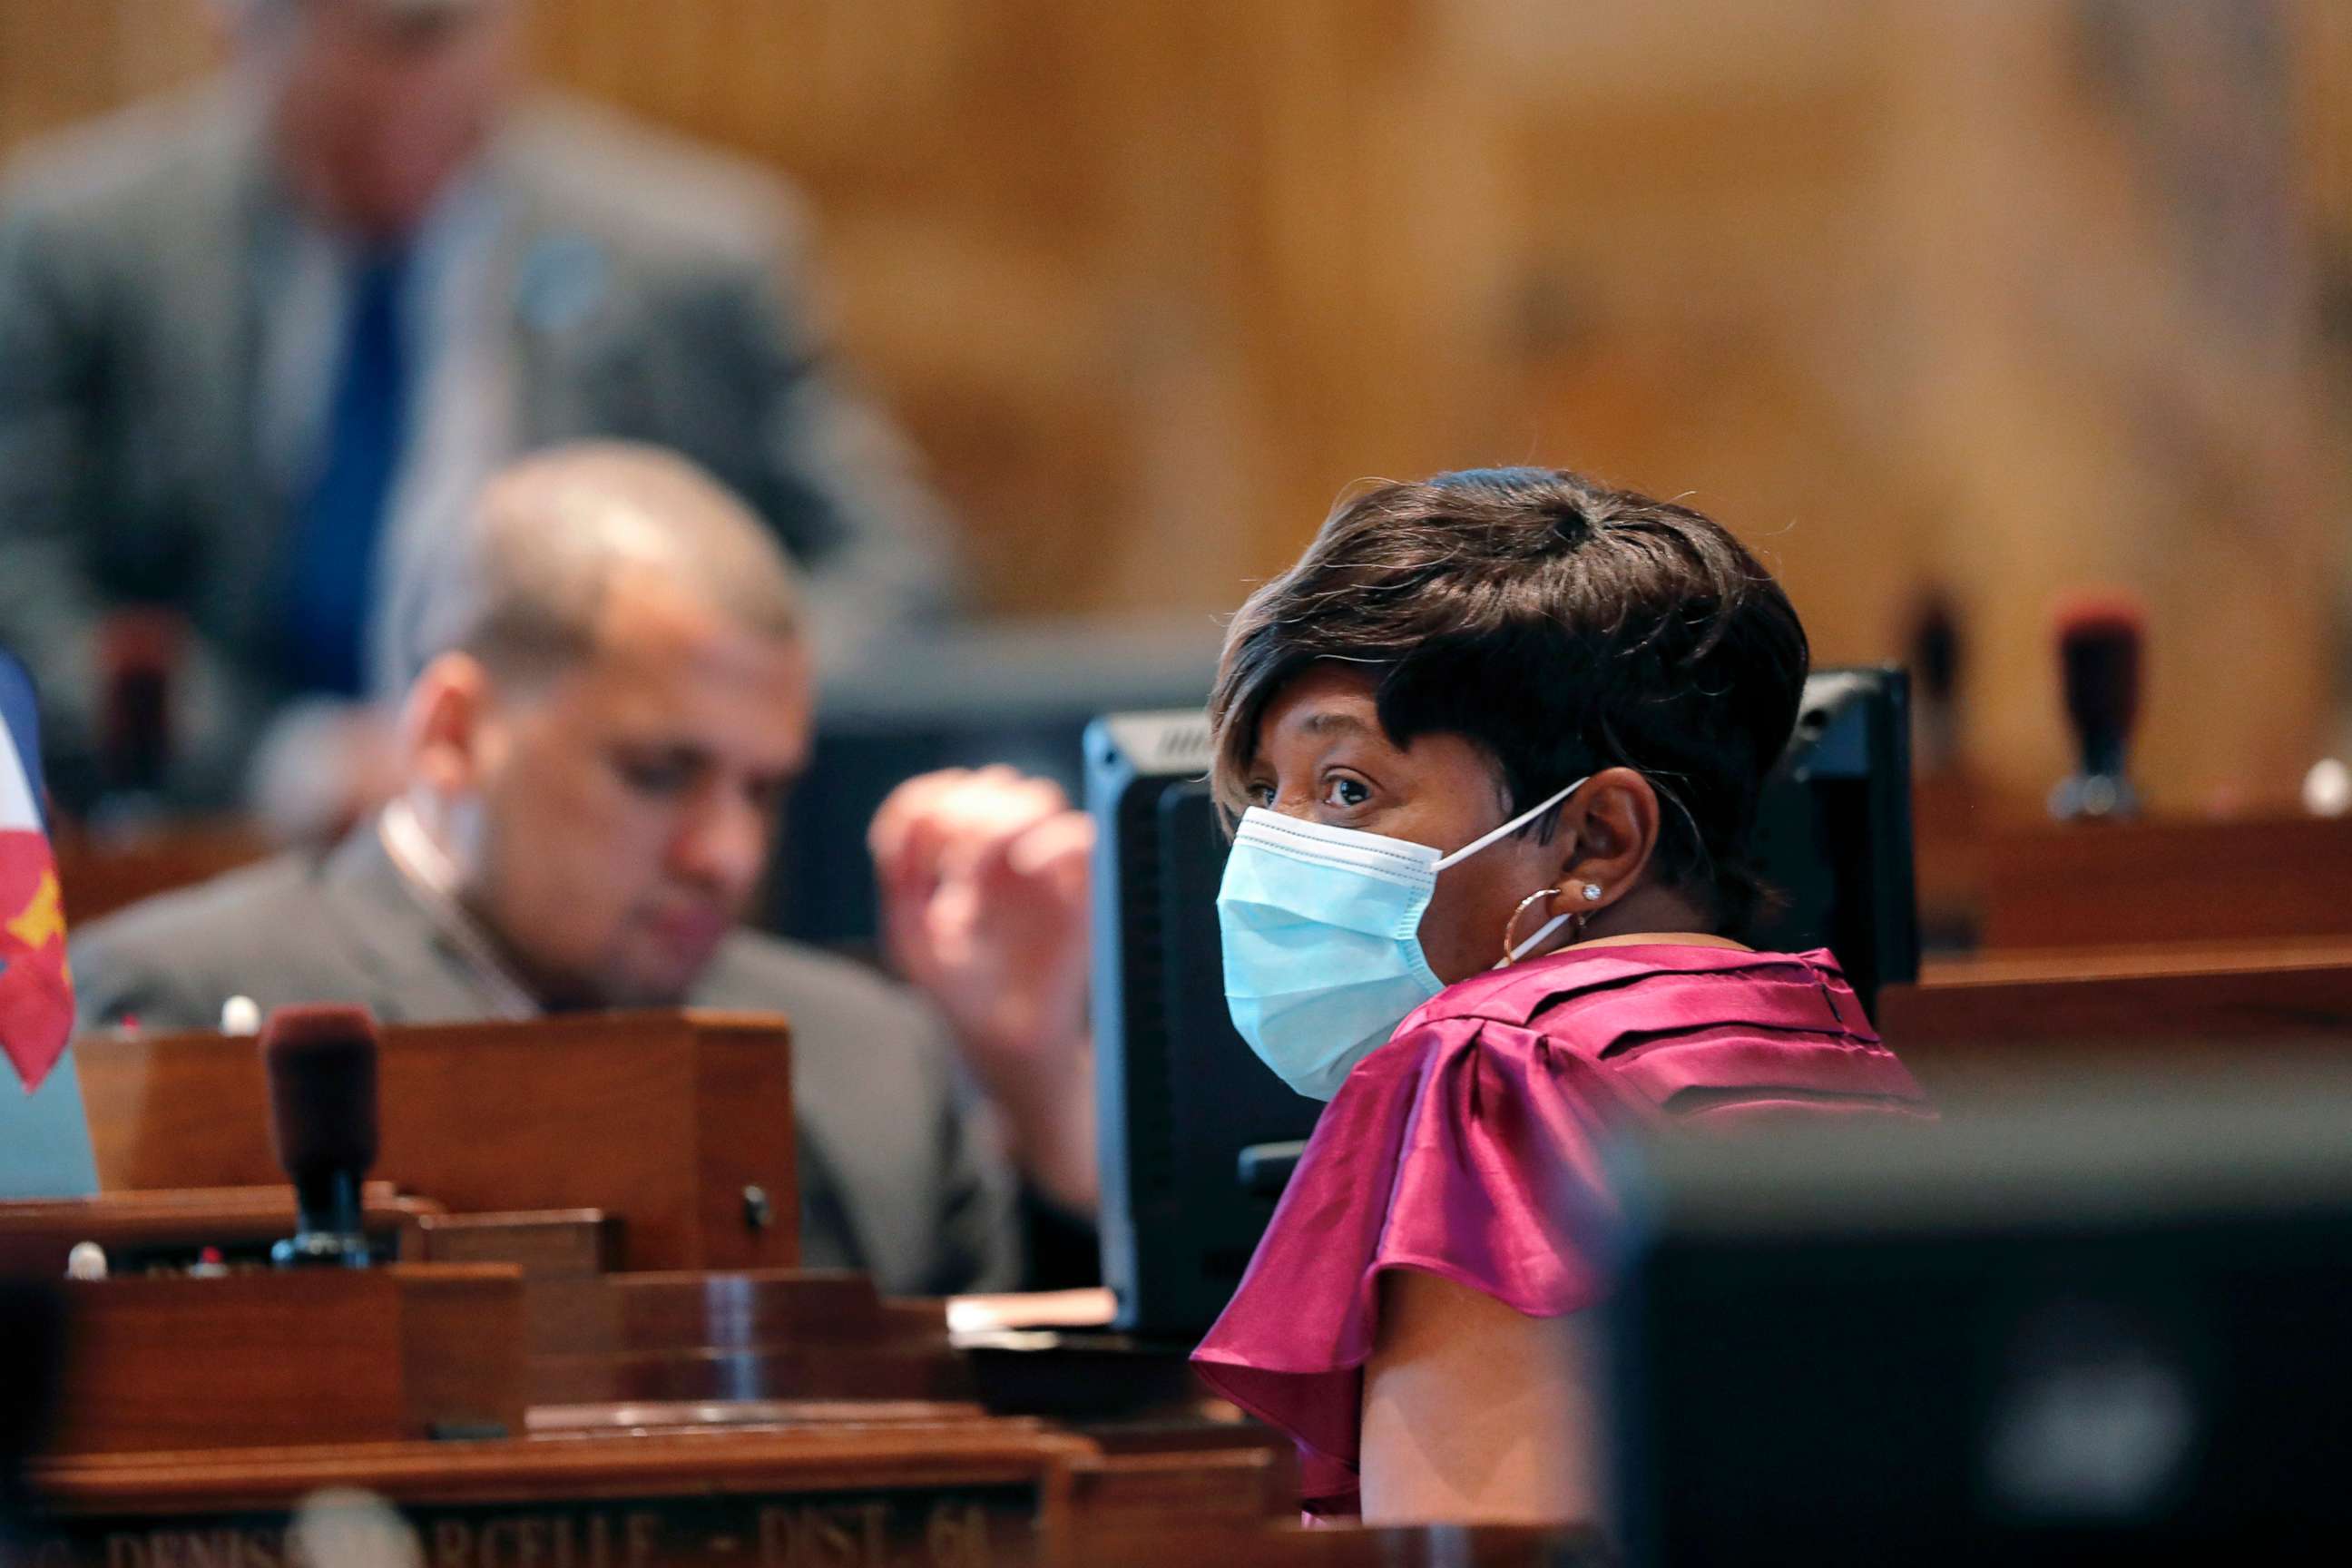 PHOTO: State Rep. Denise Marcelle wears a mask as legislators convene in a limited number while exercising social distancing, due to the new coronavirus pandemic, at the State Capitol in Baton Rouge, La., March 31, 2020.